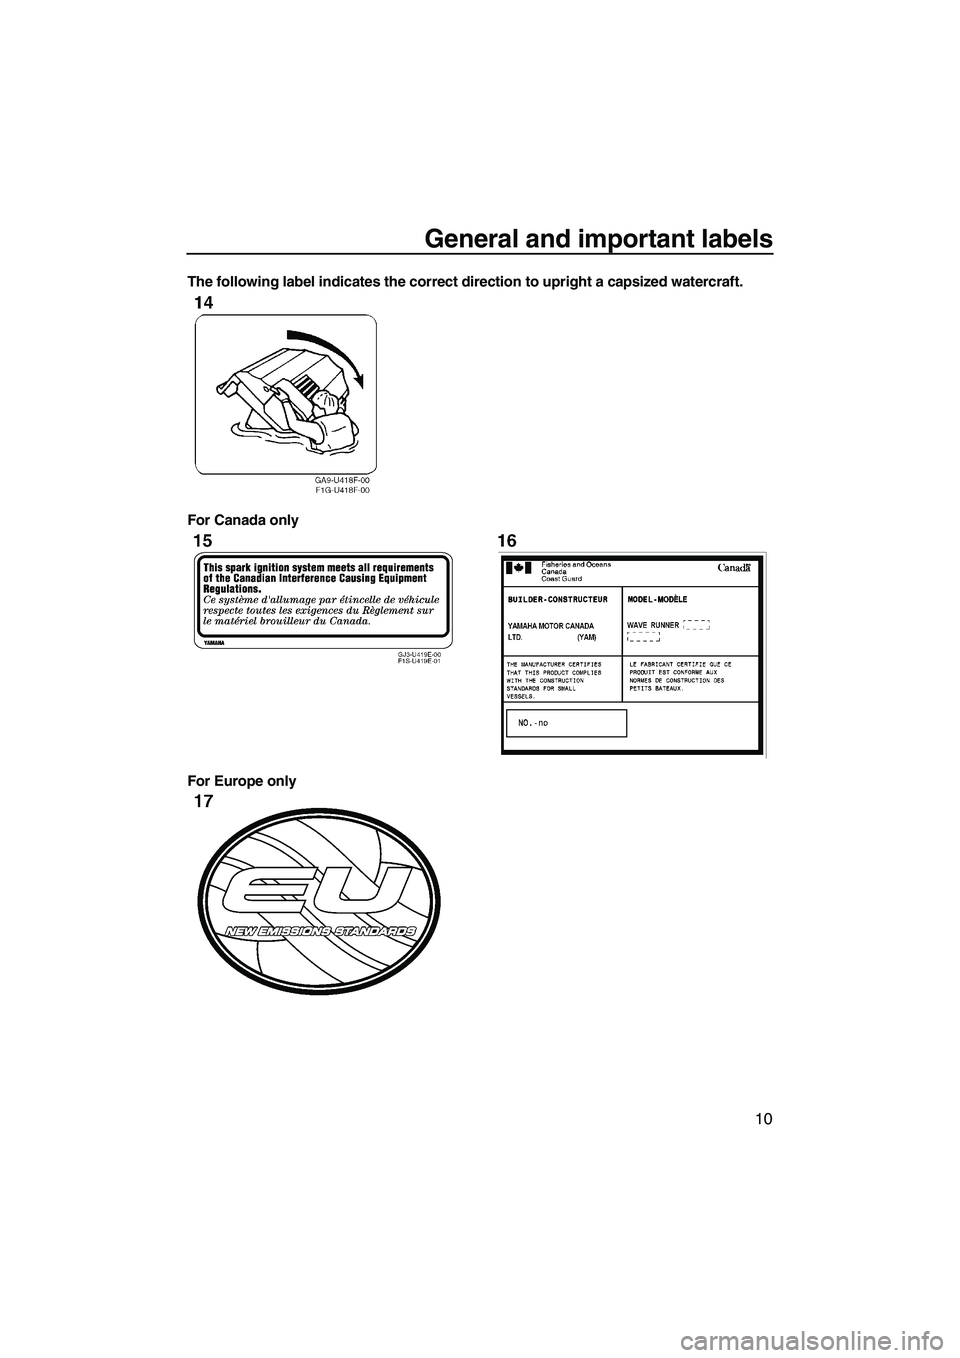 YAMAHA VX CRUISER 2007 User Guide General and important labels
10
The following label indicates the correct direction to upright a capsized watercraft.
For Canada only
For Europe only
UF1K72E0.book  Page 10  Wednesday, August 2, 2006 